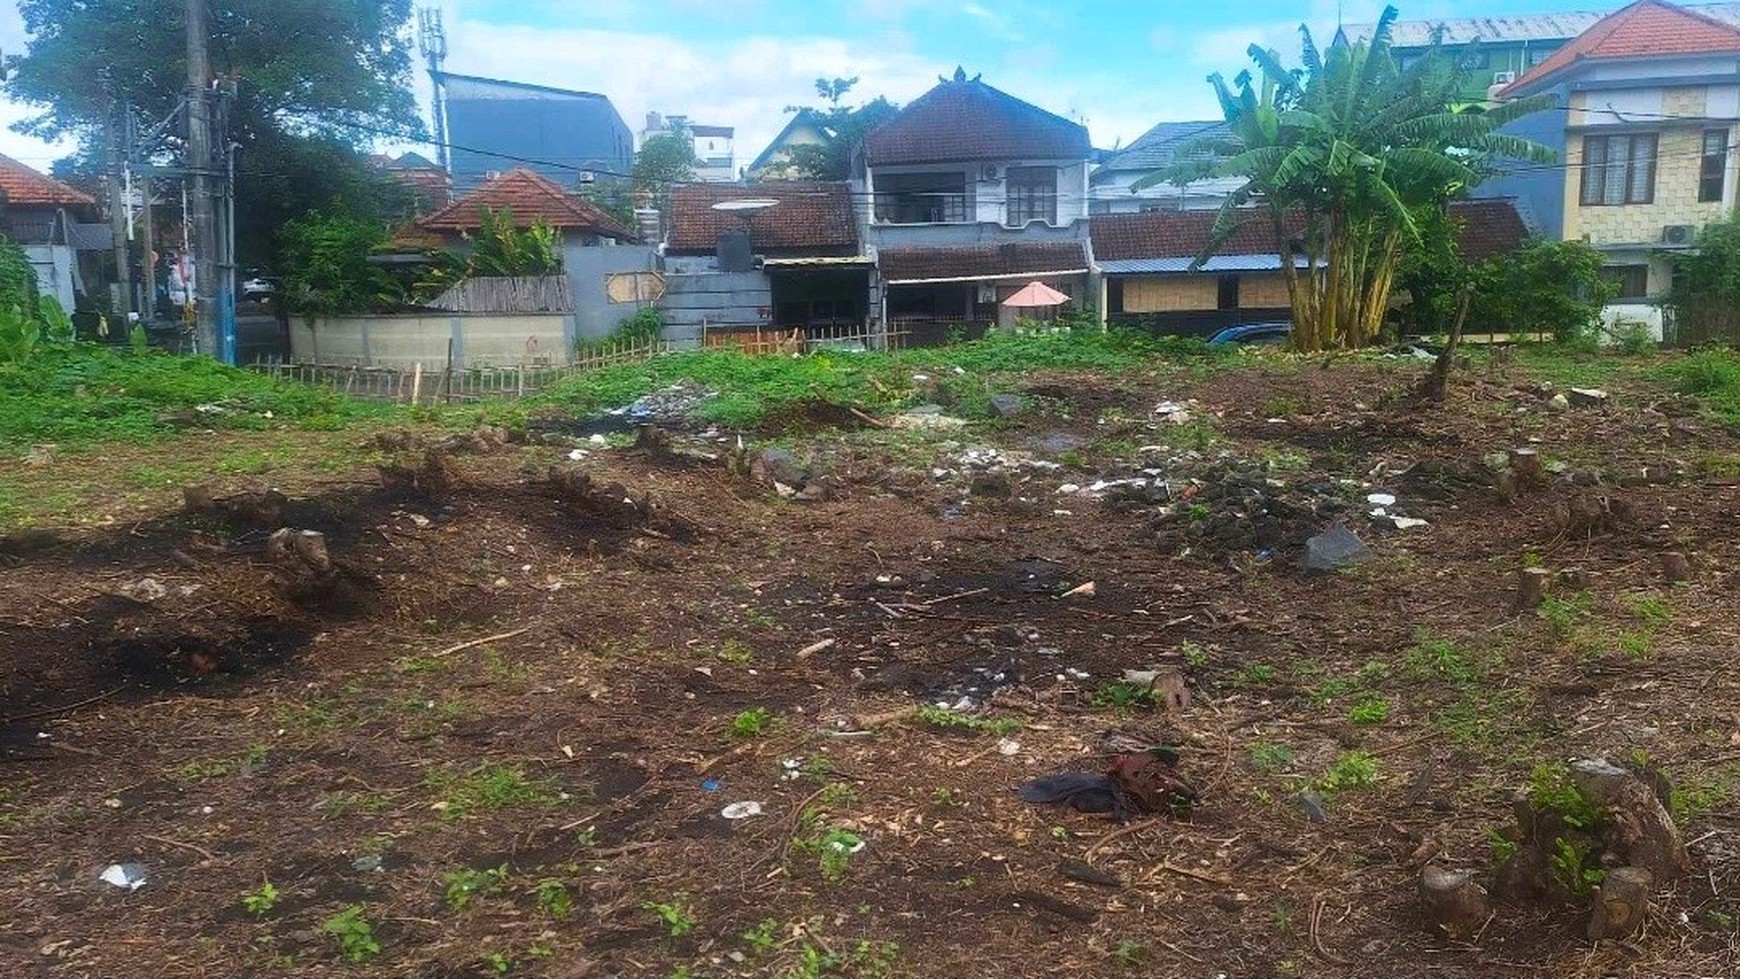 For Sale Leasehold - Land in area Canggu with good environment